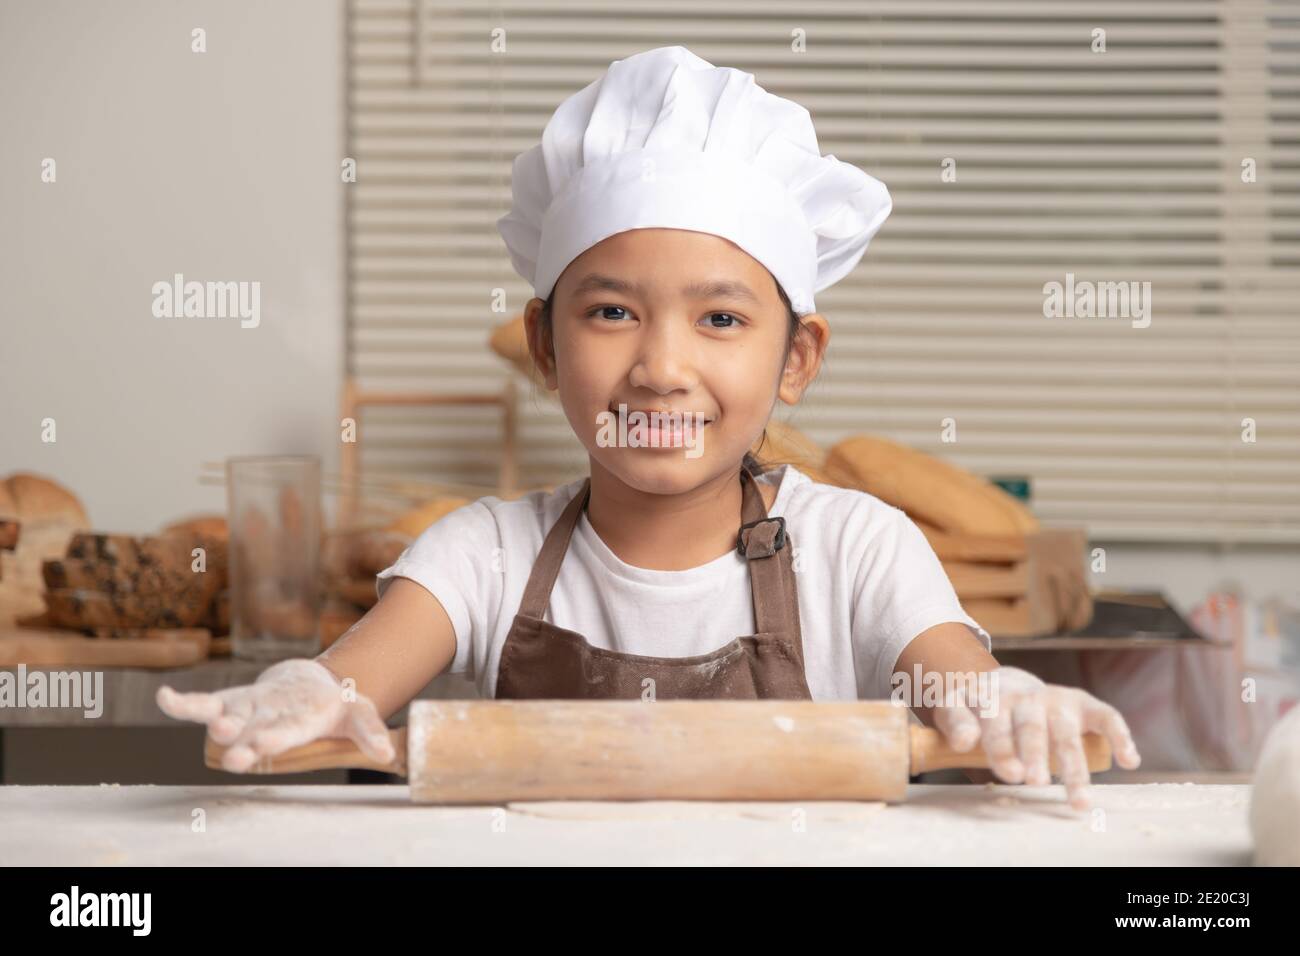 https://c8.alamy.com/comp/2E20C3J/asian-little-girl-uses-a-rolling-pin-to-knead-the-dough-to-make-a-homemade-bakery-the-kid-wore-a-white-chef-hat-brown-apron-with-a-smile-2E20C3J.jpg